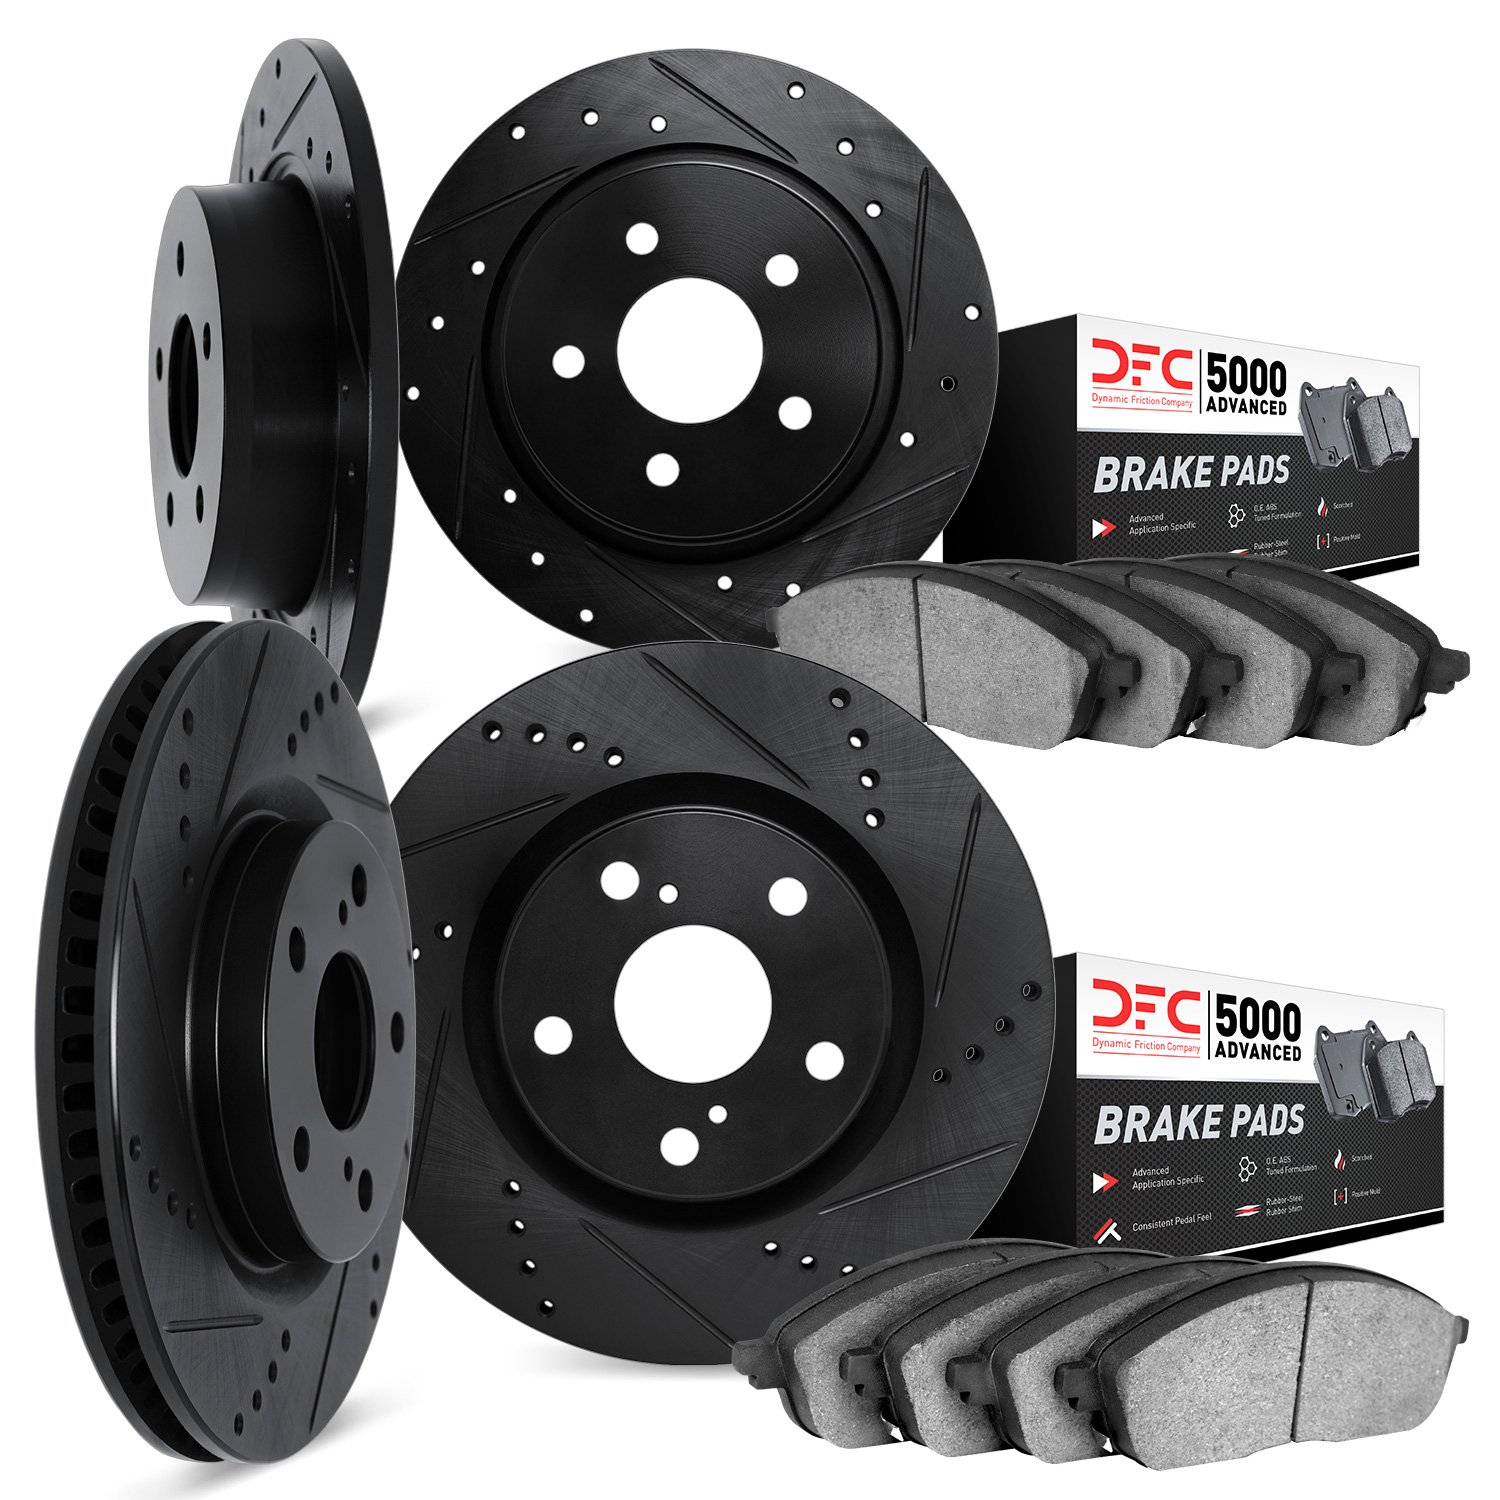 8504-13013 Drilled/Slotted Brake Rotors w/5000 Advanced Brake Pads Kit [Black], Fits Select Subaru, Position: Front and Rear